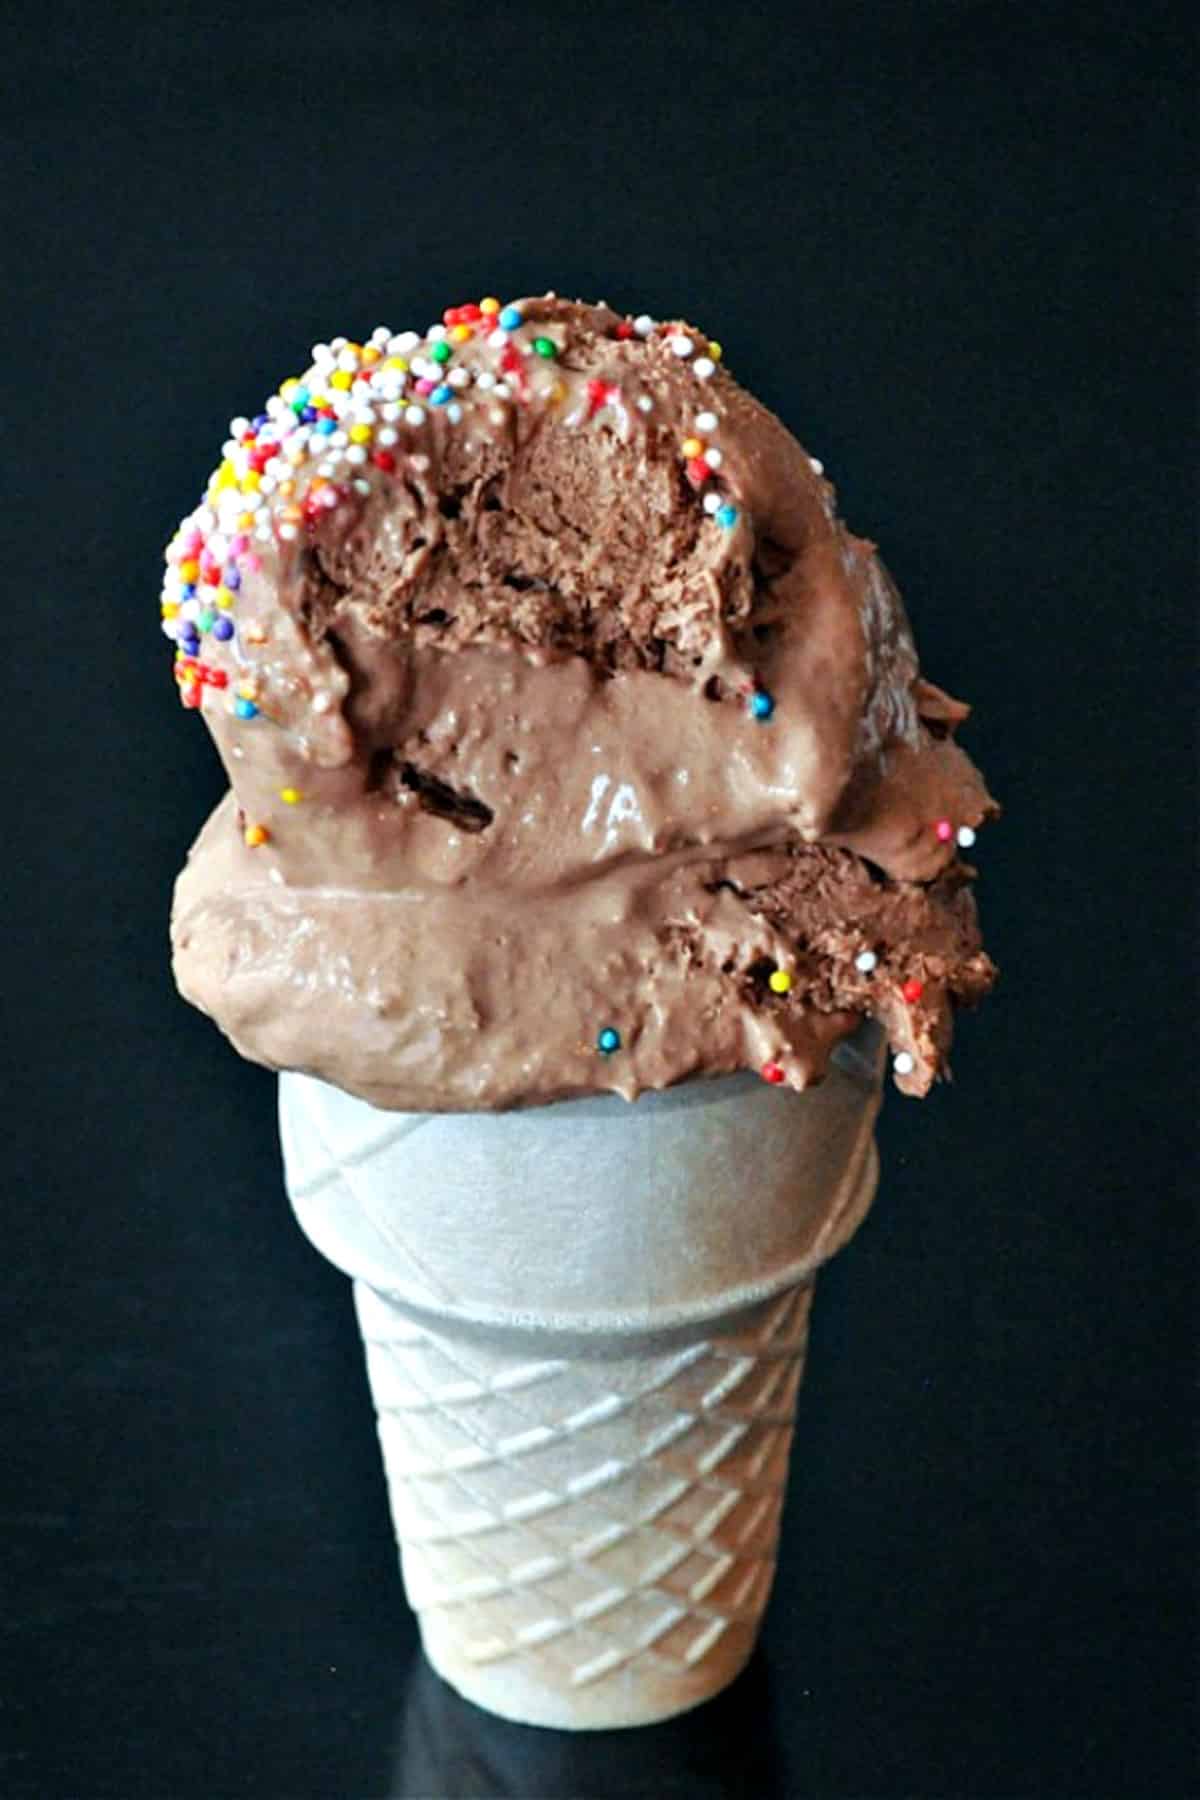 Two scoops of chocolate oat milk ice cream with rainbow colored sprinkles in a cone against a black background.